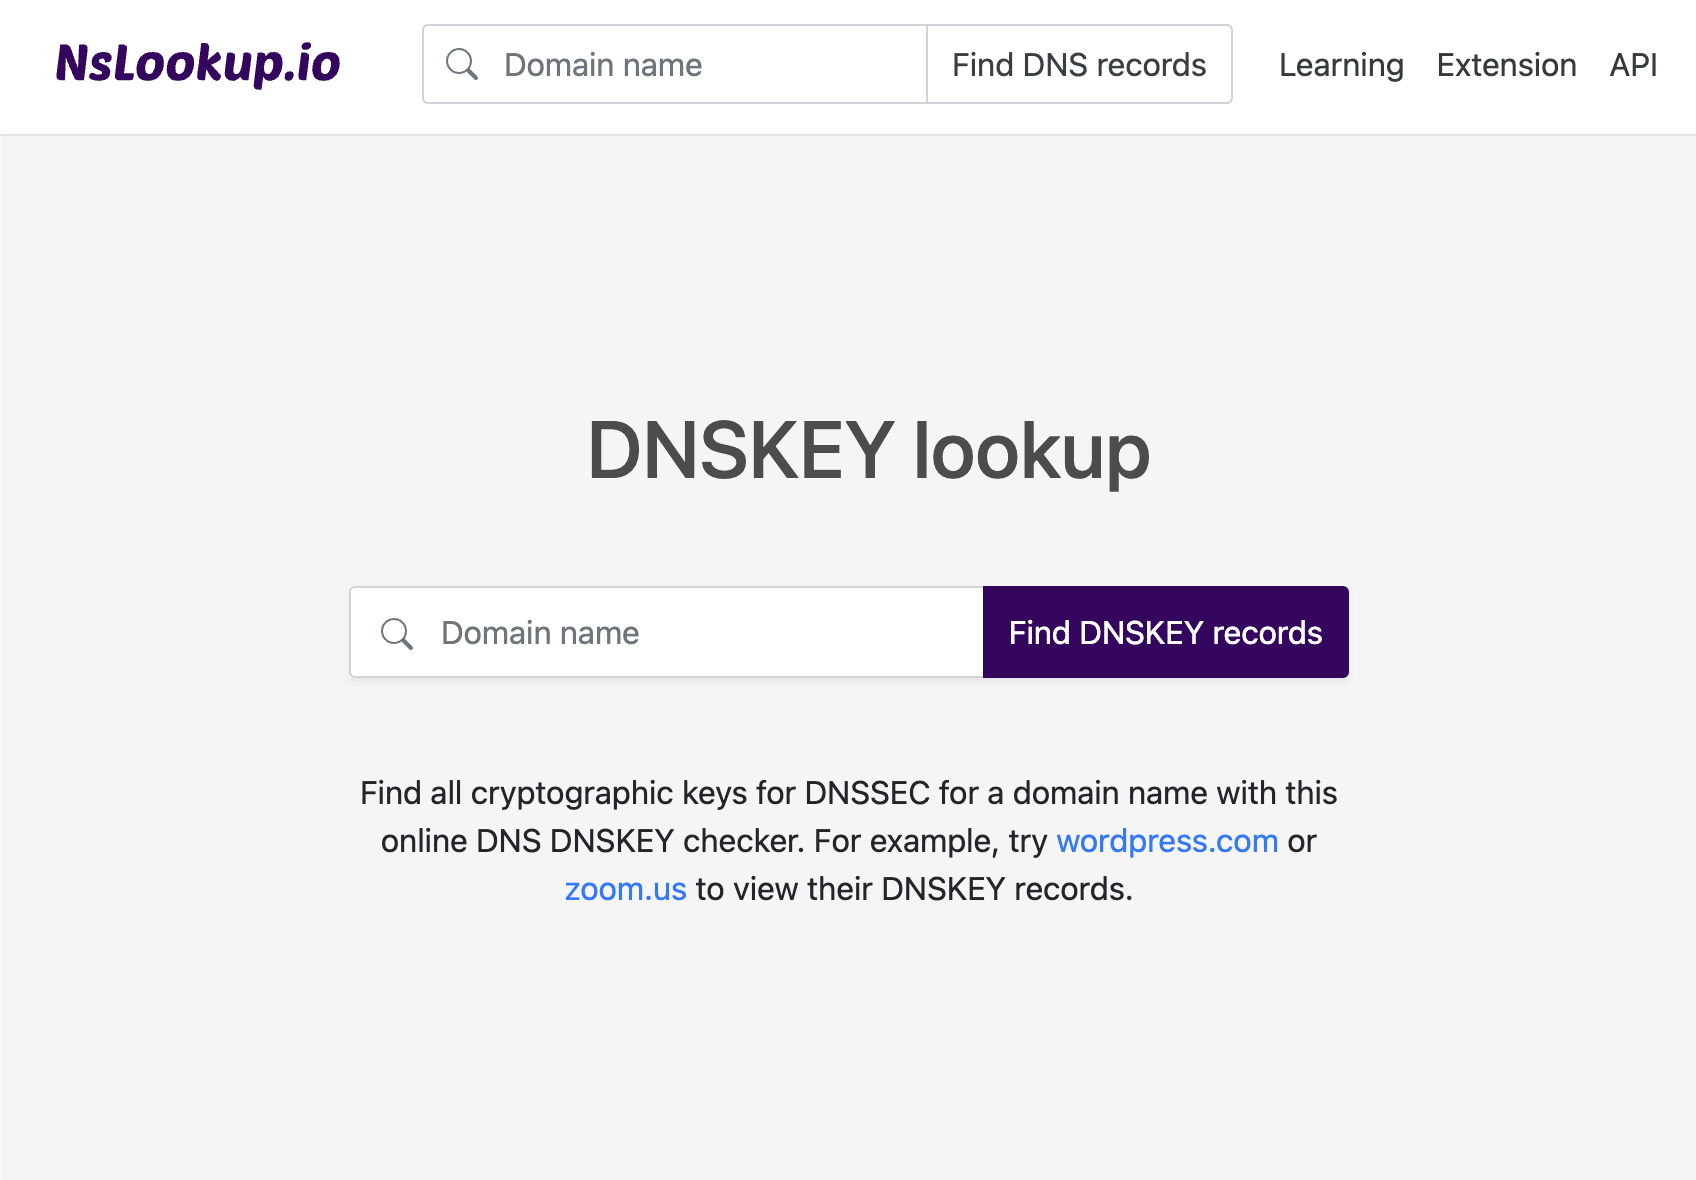 Raycast Store: Dig - DNS Lookup